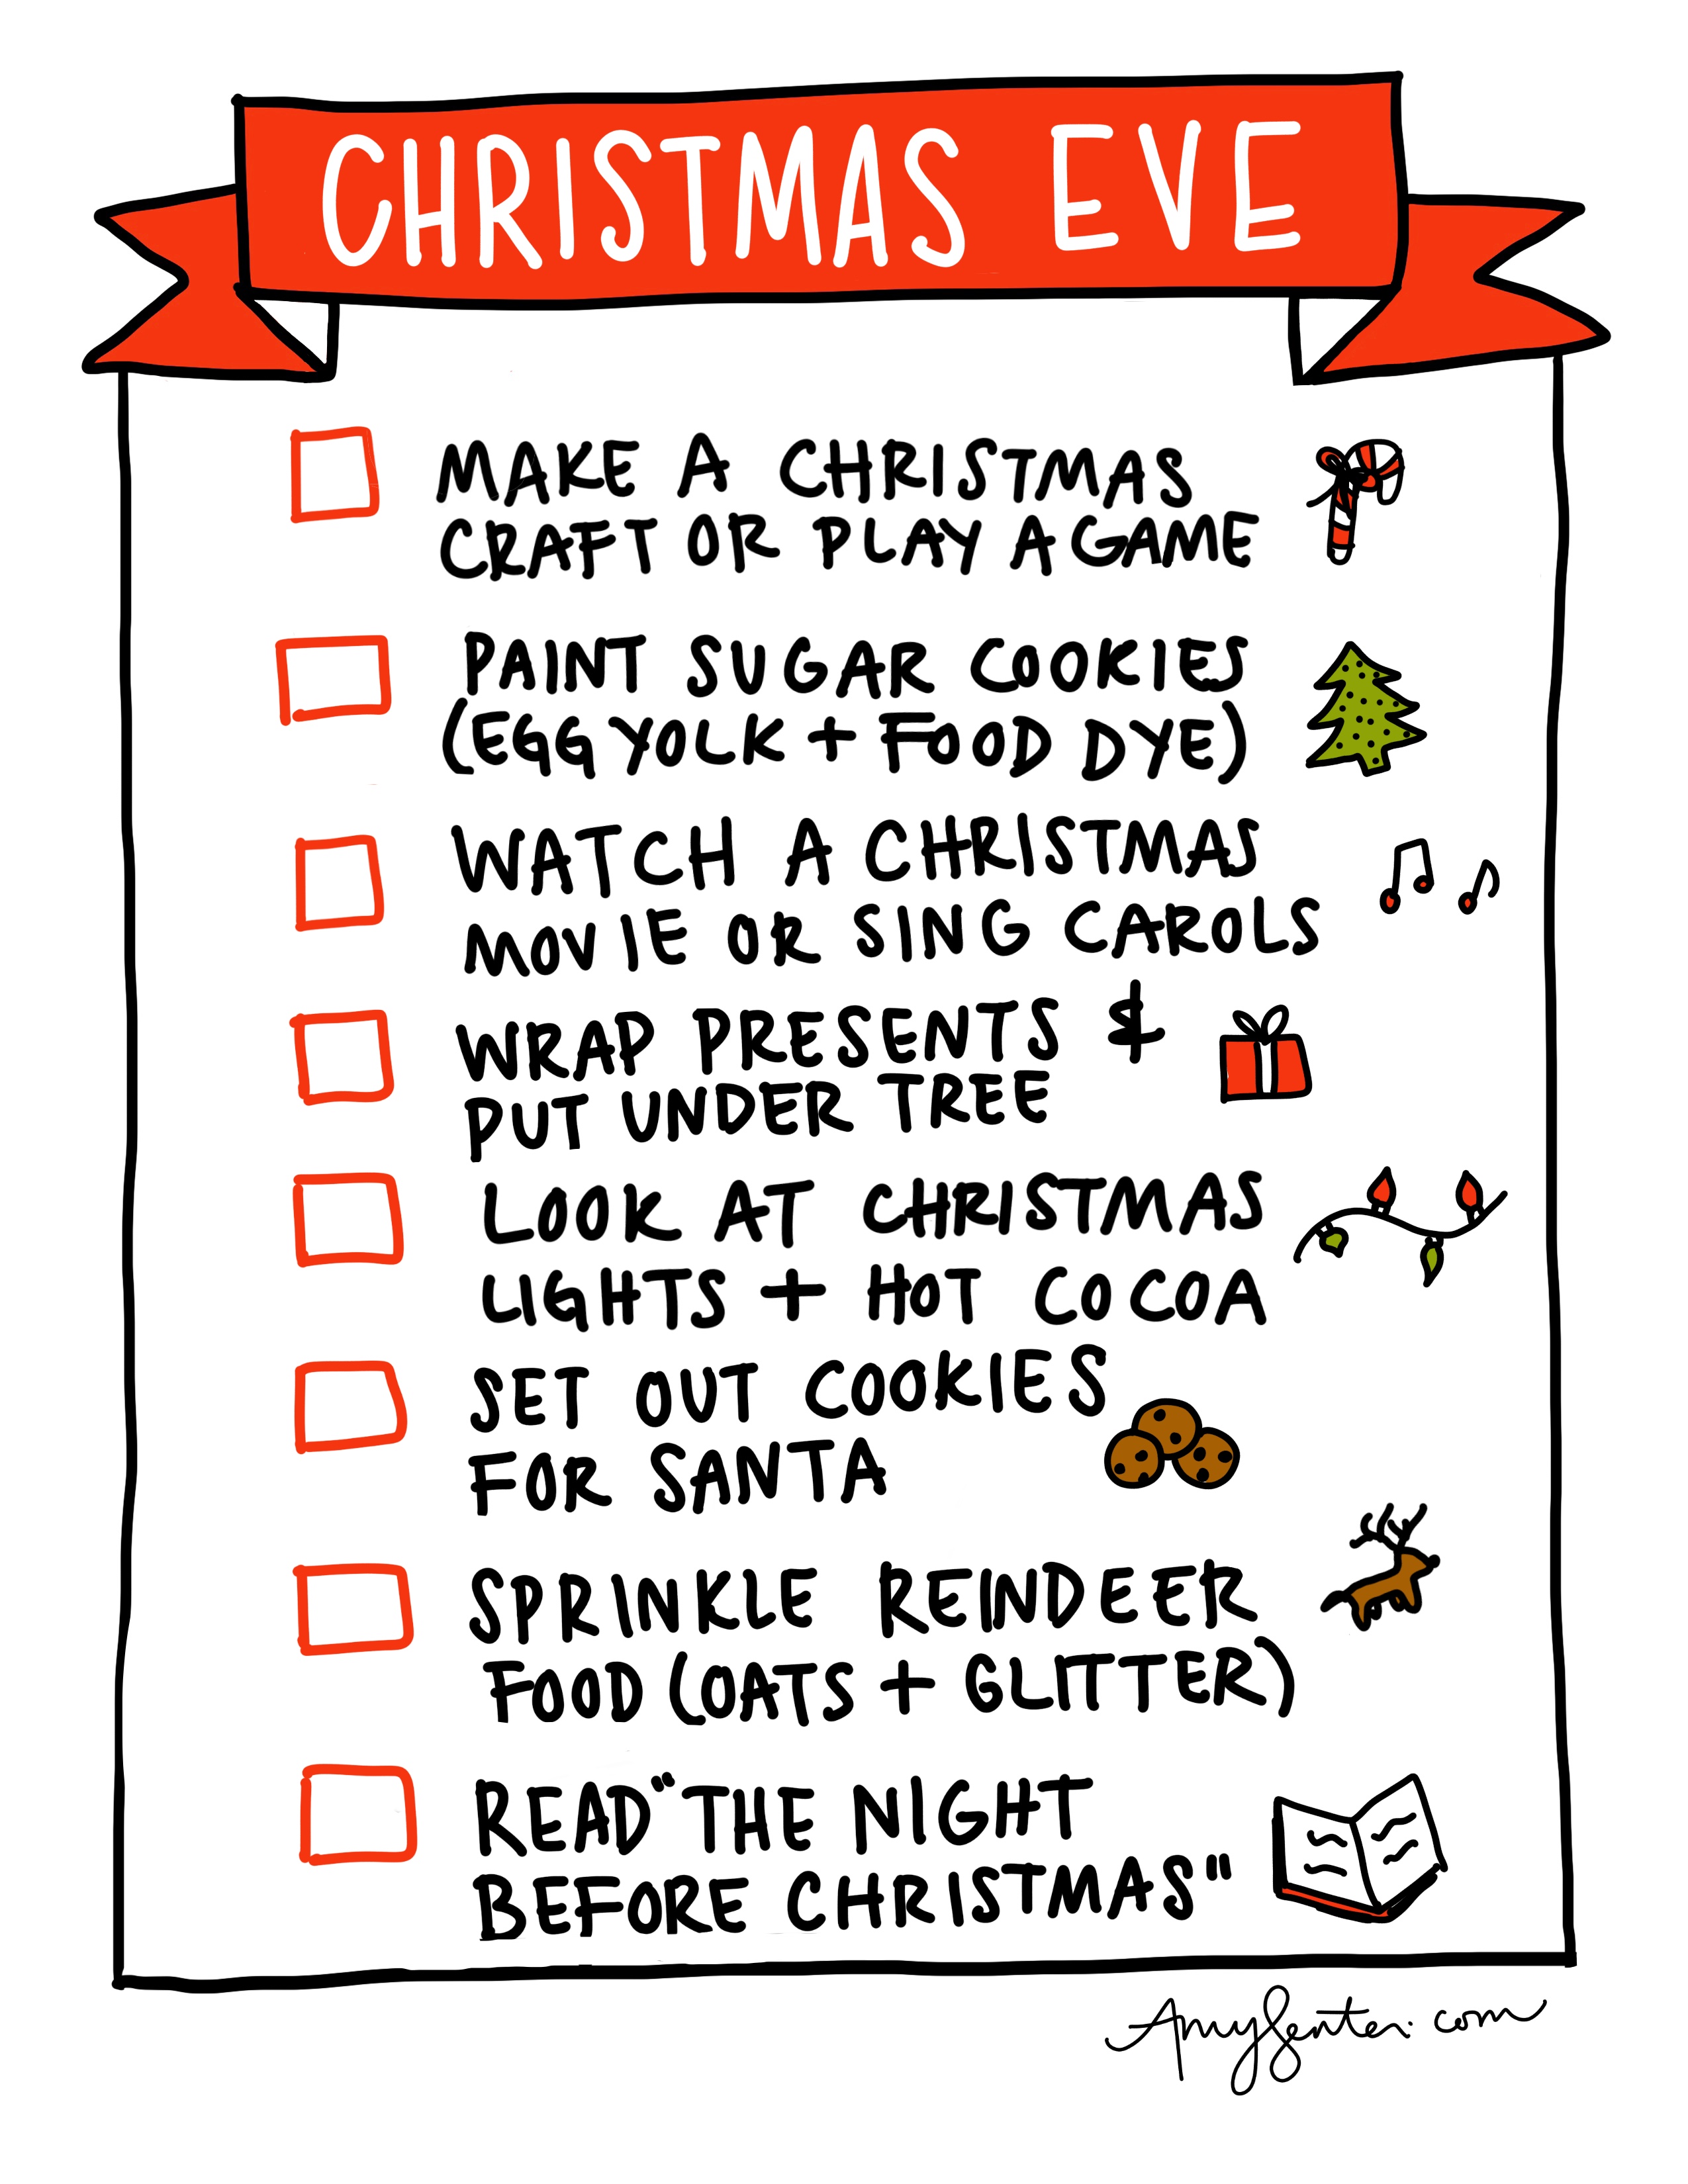 Print this Christmas Eve Itinerary to Make Your “Staycation” Special